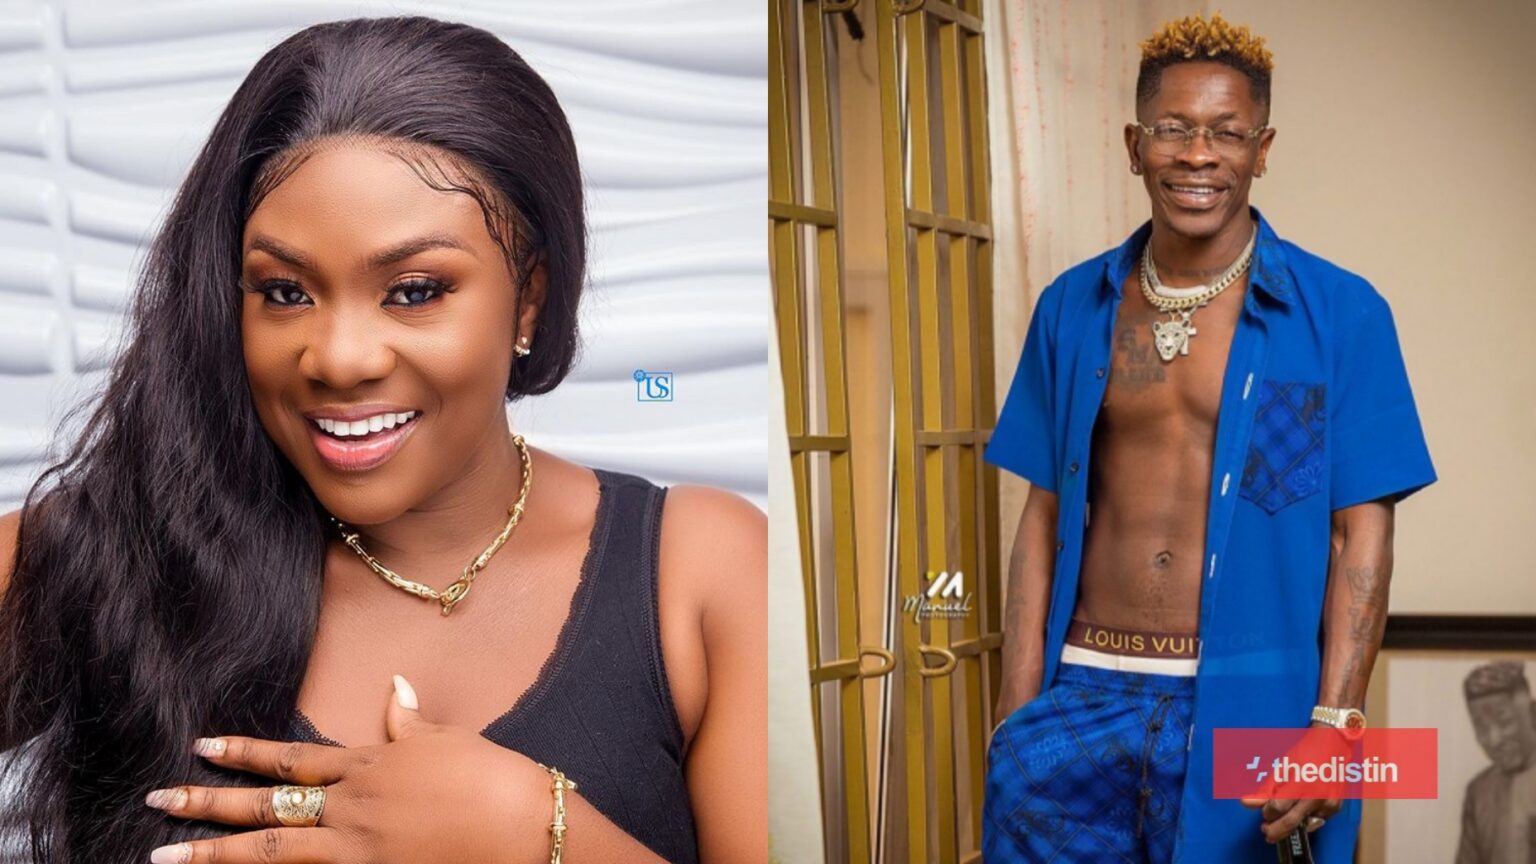 Video: Shatta Wale’s Cousin Out Of Frustration Leaked Celebrities Shatta Wale Chopped In The Industry